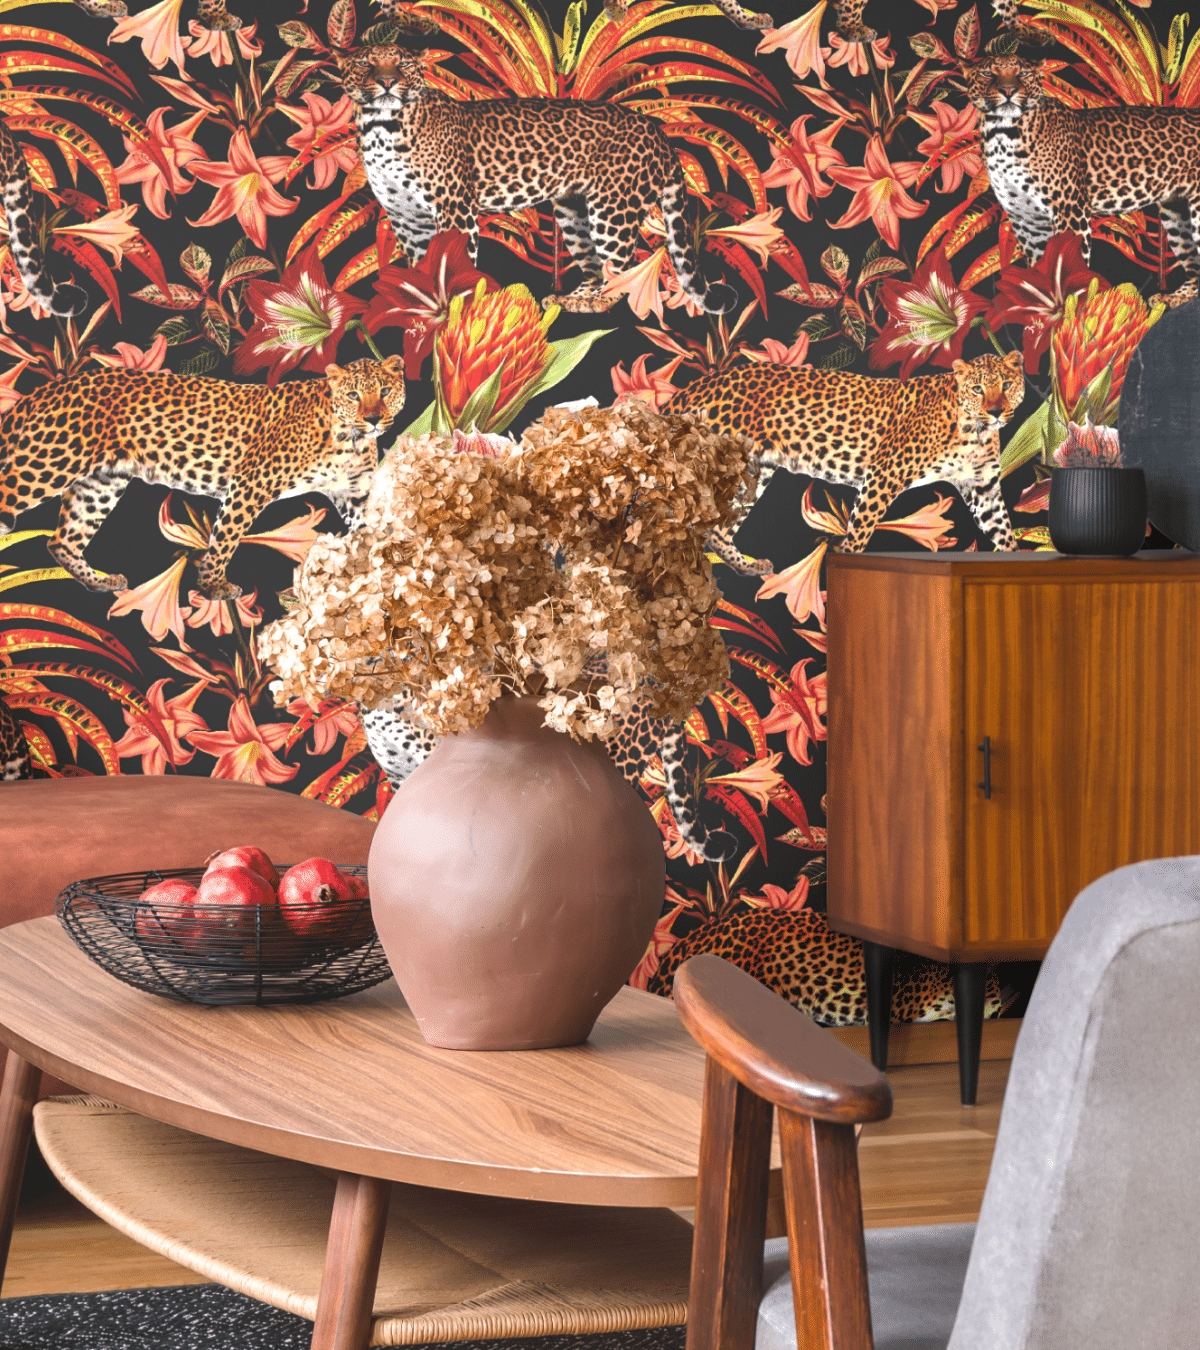 Meet Pantera. He’s strong, sexy and part of our new take on animal prints. Our newest line of fabrics, wallpaper and trim come in three debut colorways and feature a large stalking leopard, named Pantera, of course. 